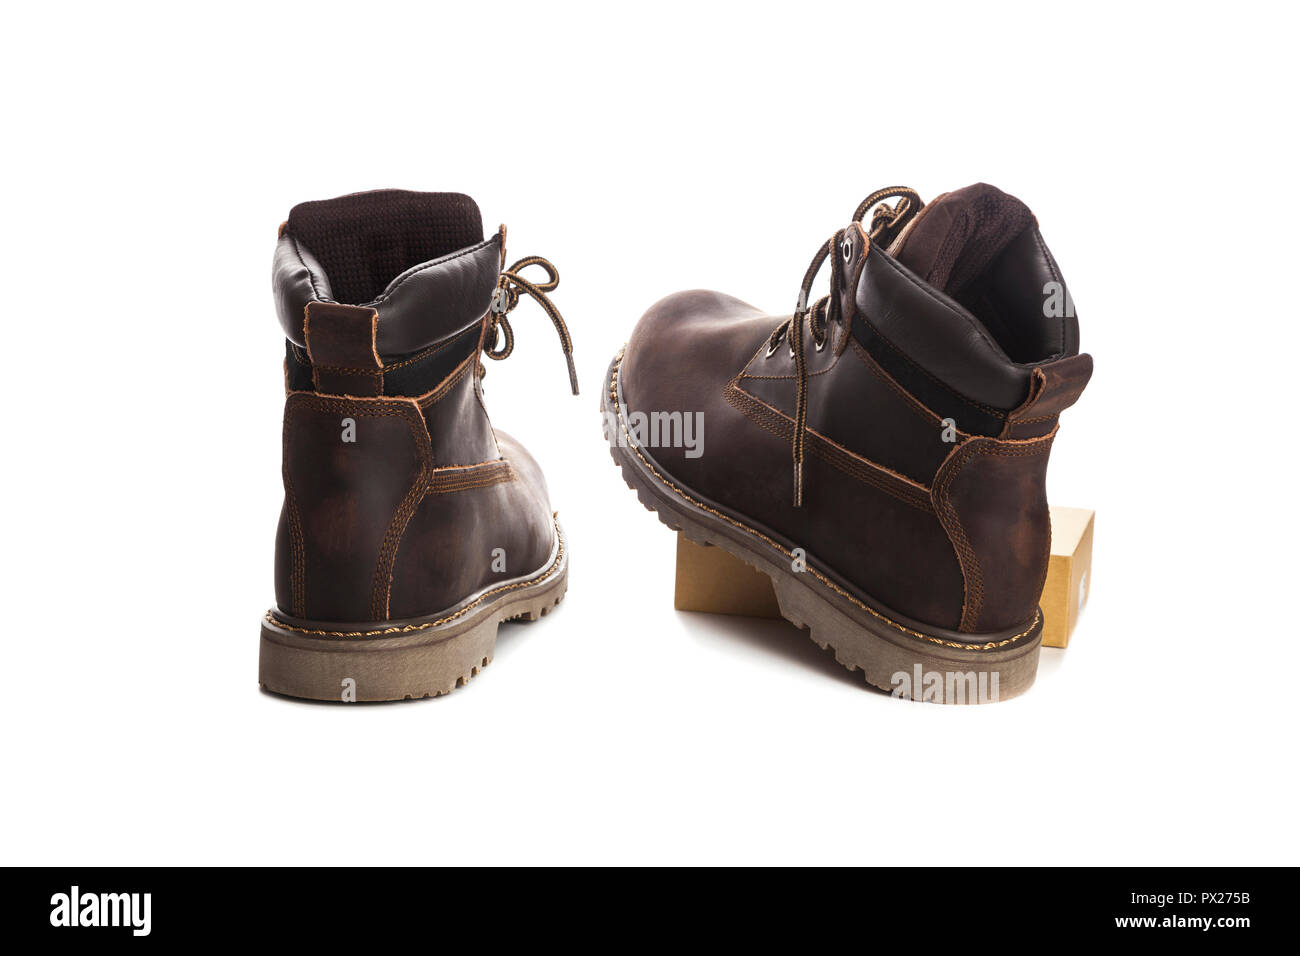 Man ankle boots, brown color, with nubuck leather Stock Photo